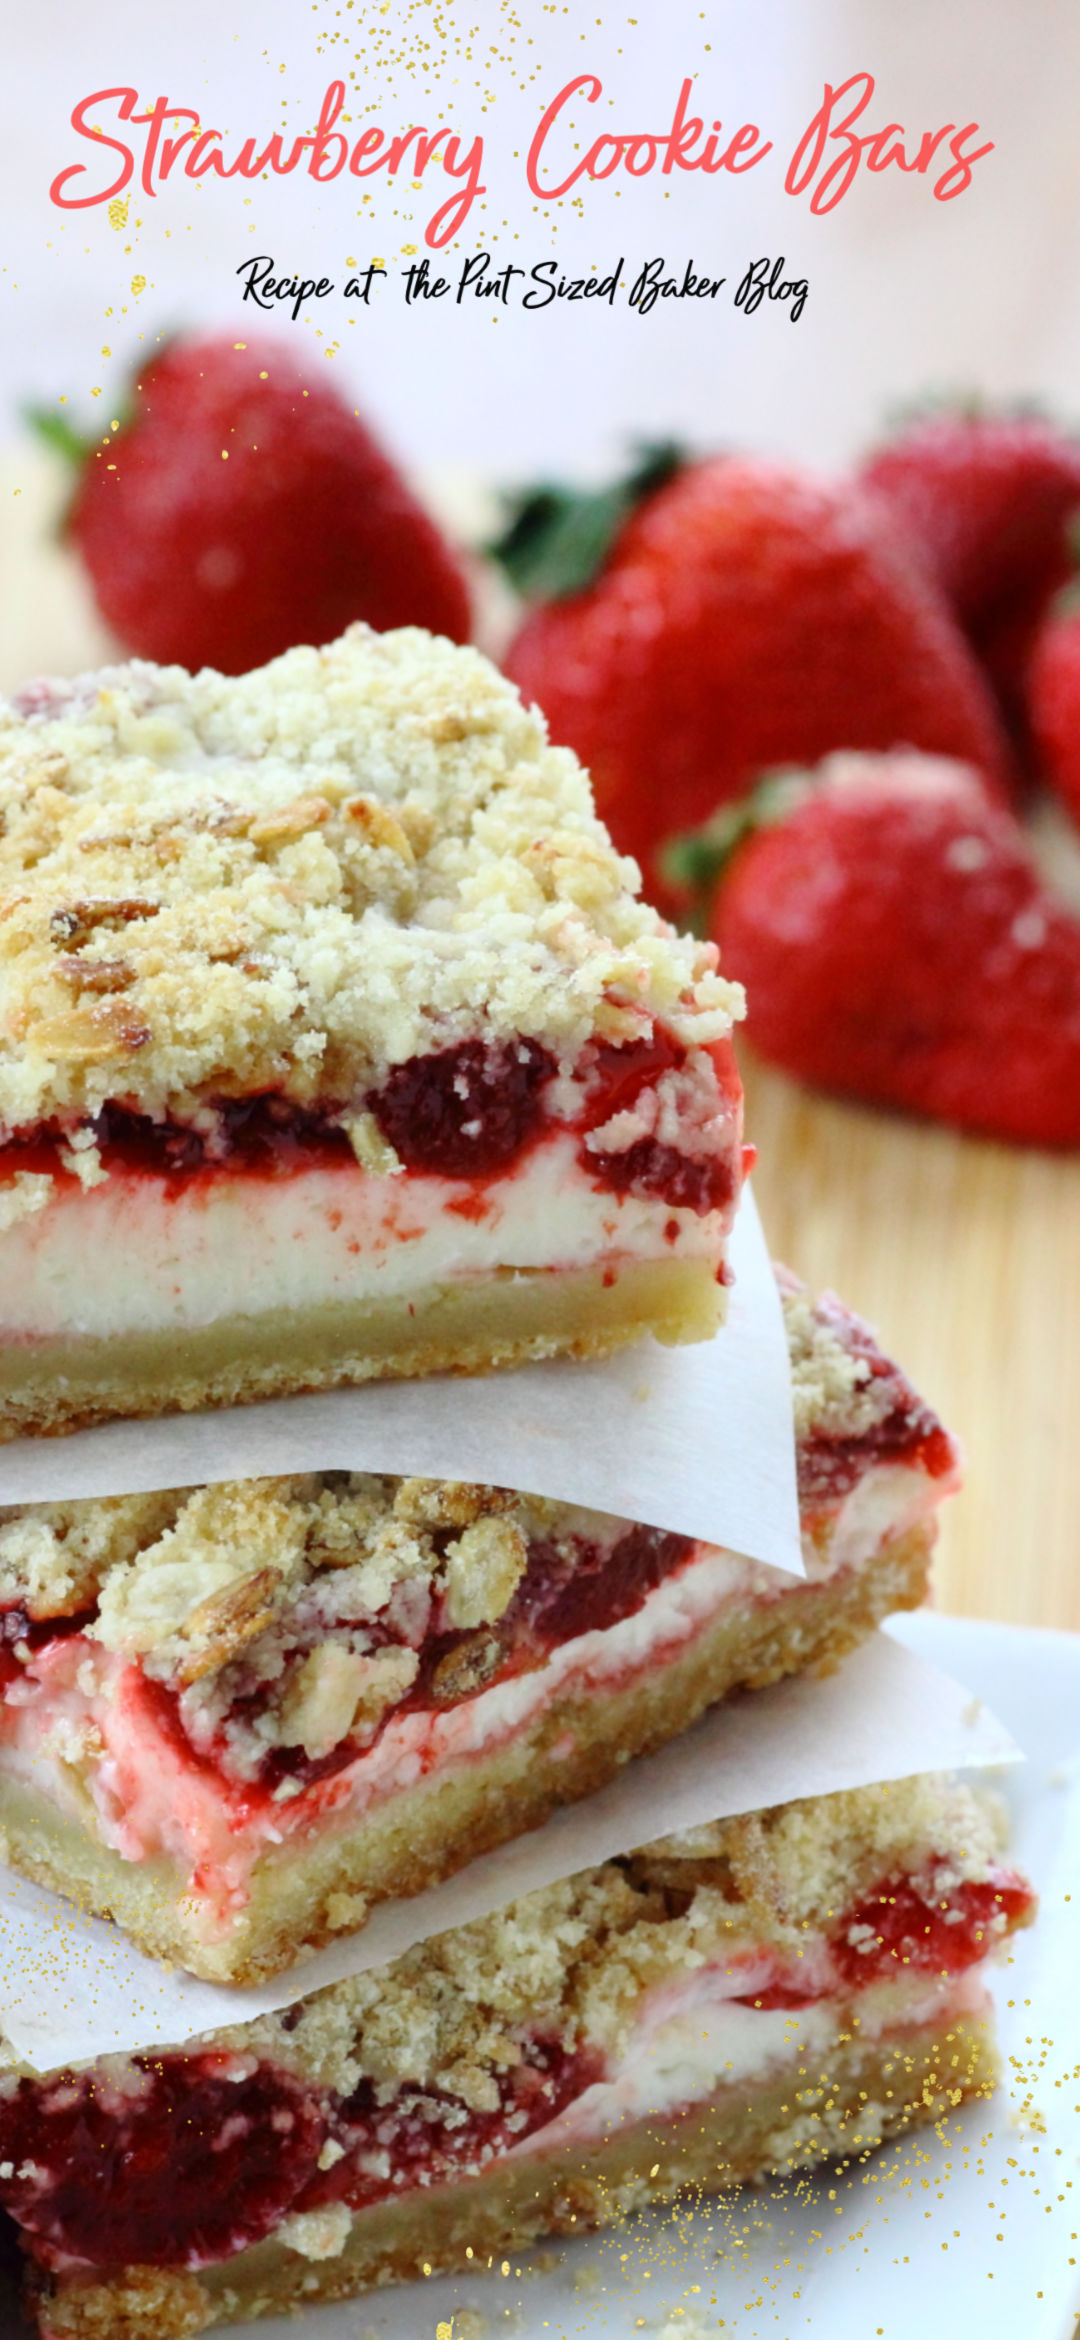 This strawberry crumble recipe is simple to make and delicious! Made with cream cheese, cookie dough, and strawberry pie filling, these strawberry crumble bars will be your new favorite dessert.